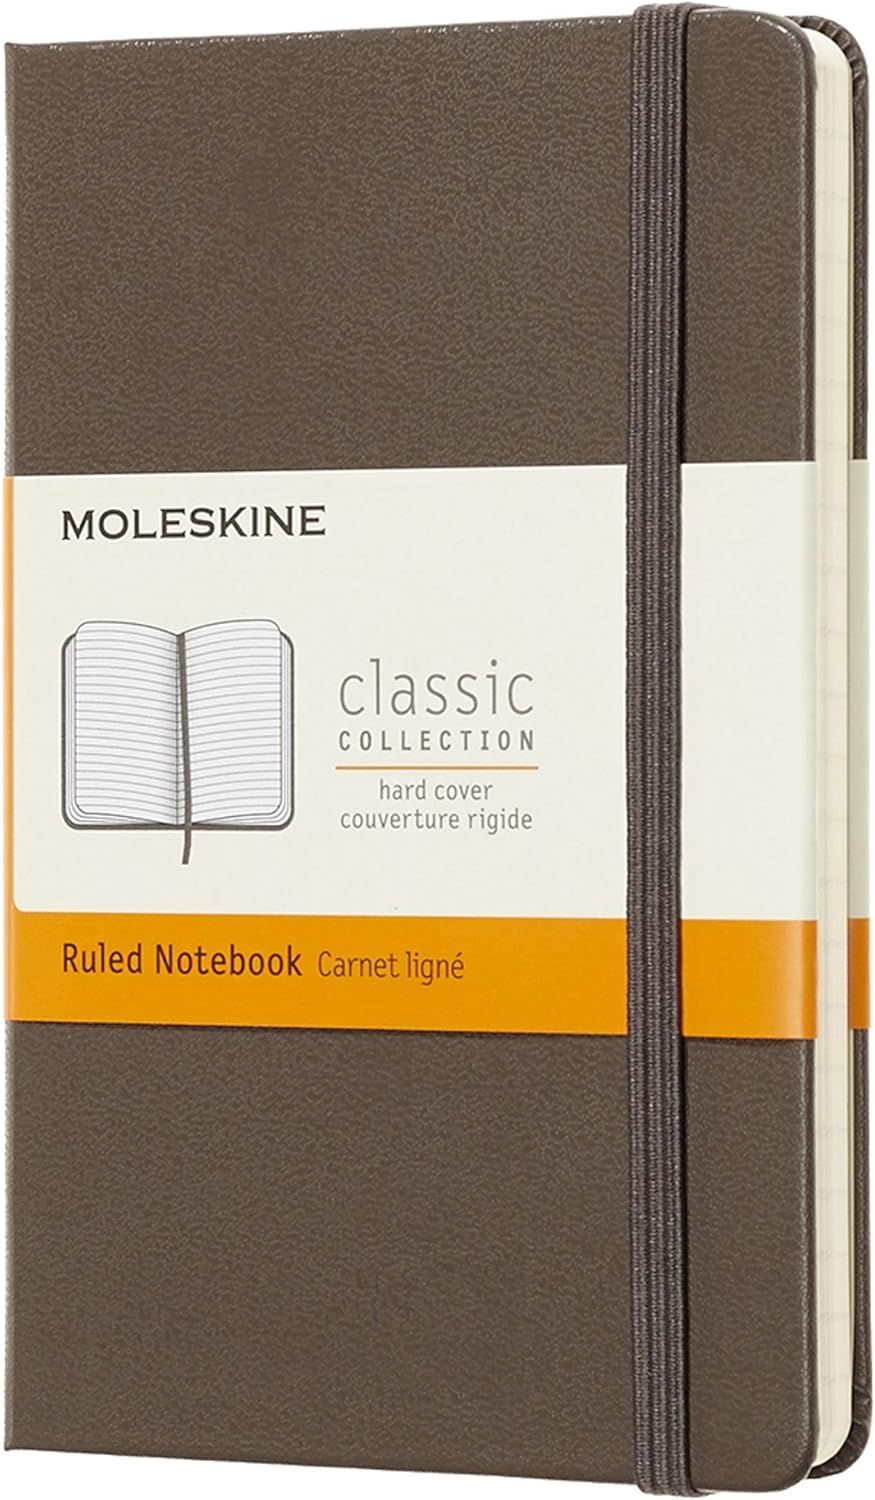 Moleskine Classic Notebook, Hard Cover, Pocket (3.5" x 5.5") Ruled/Lined, Earth Brown, 192 Pages | Amazon (US)